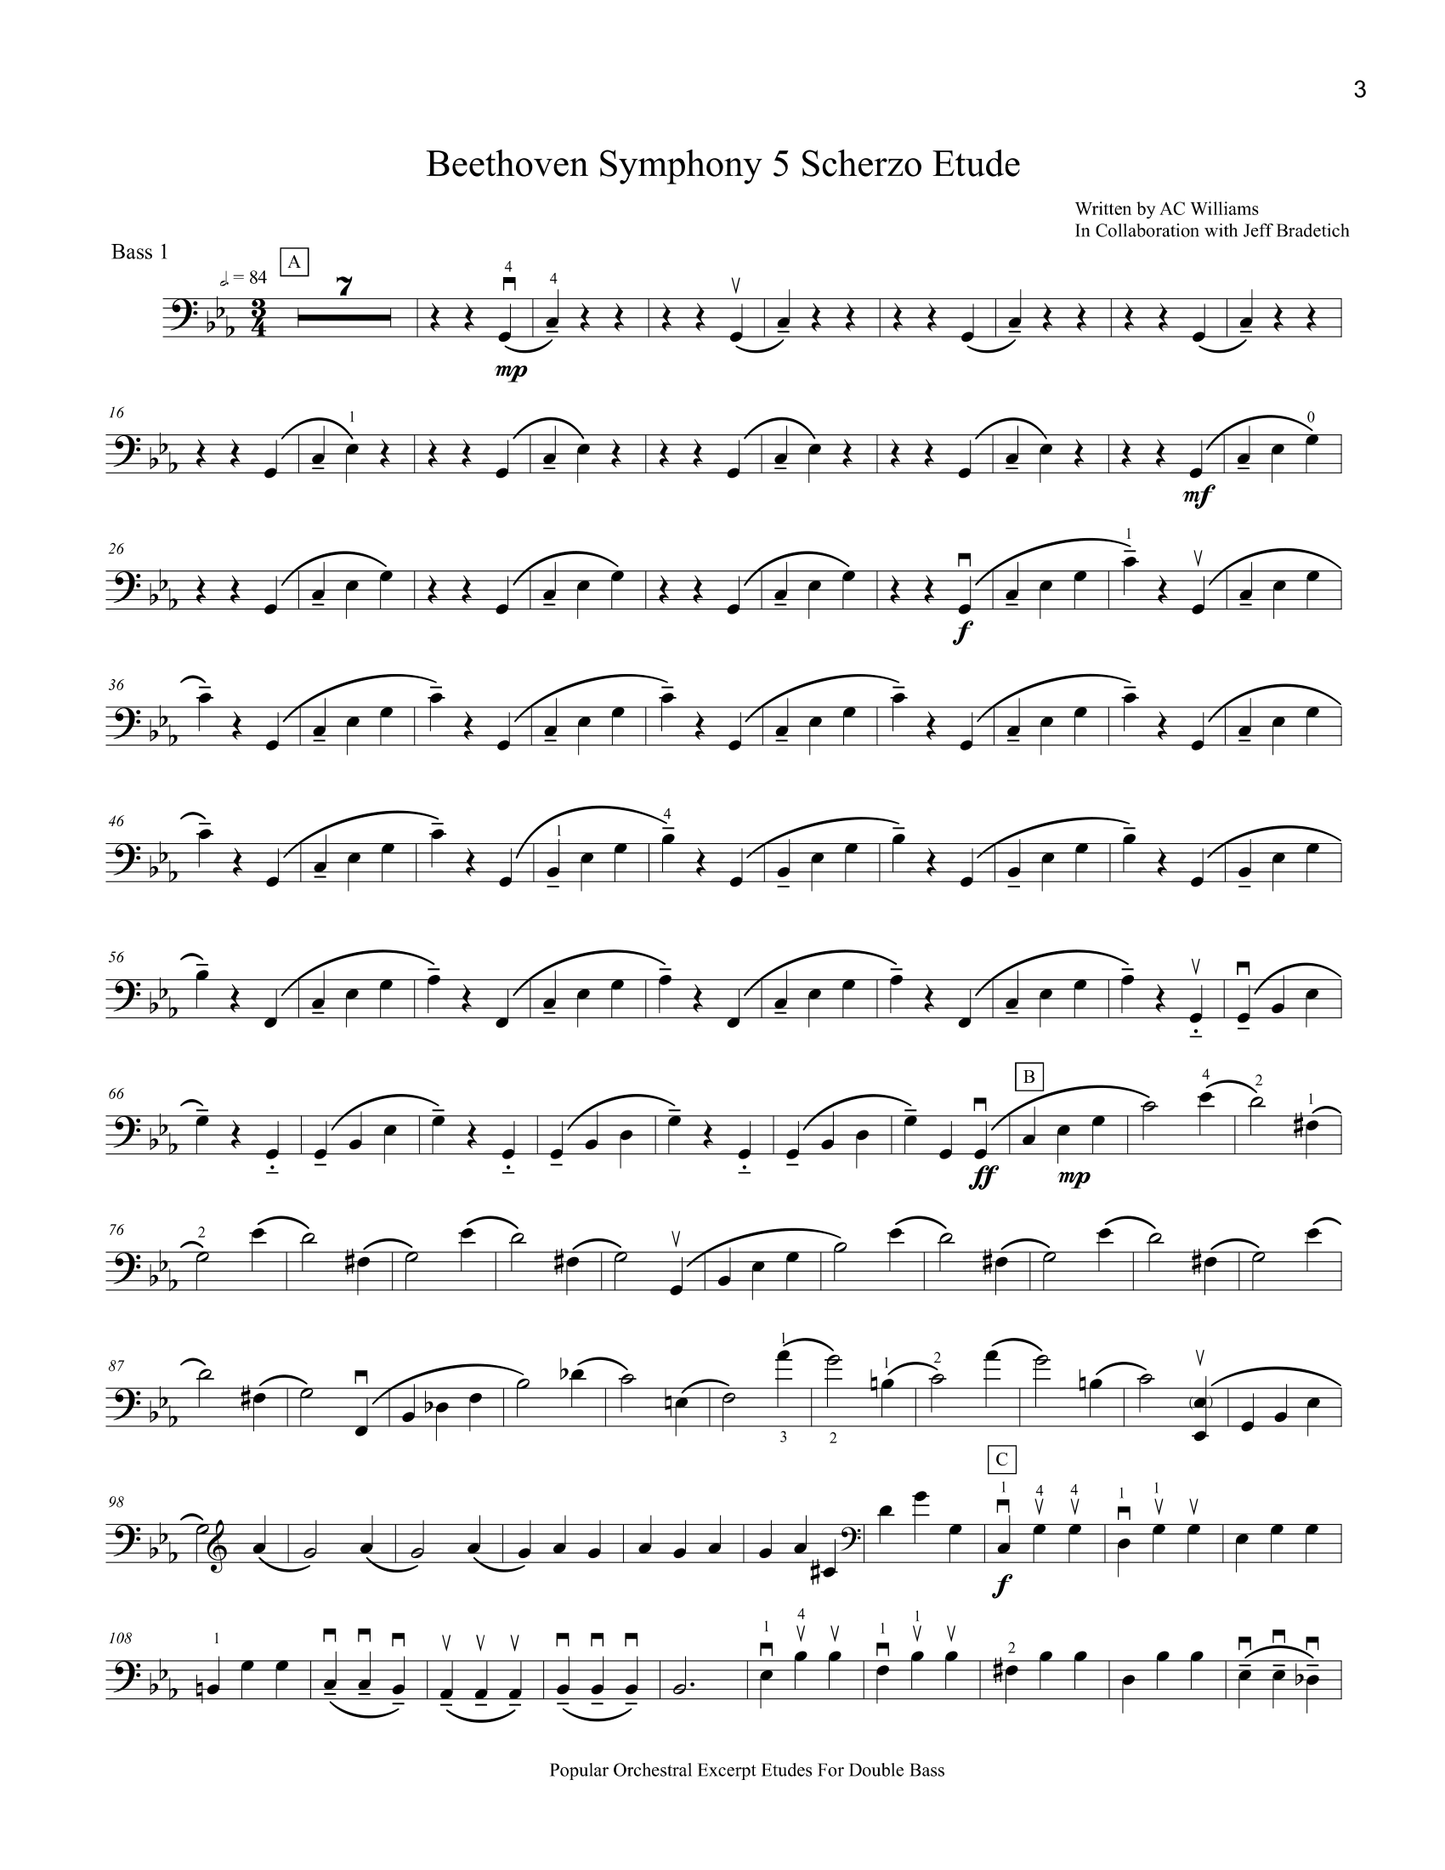 Williams and Bradetich: Popular Orchestral Excerpt Etudes For Double Bass: Standard Packet